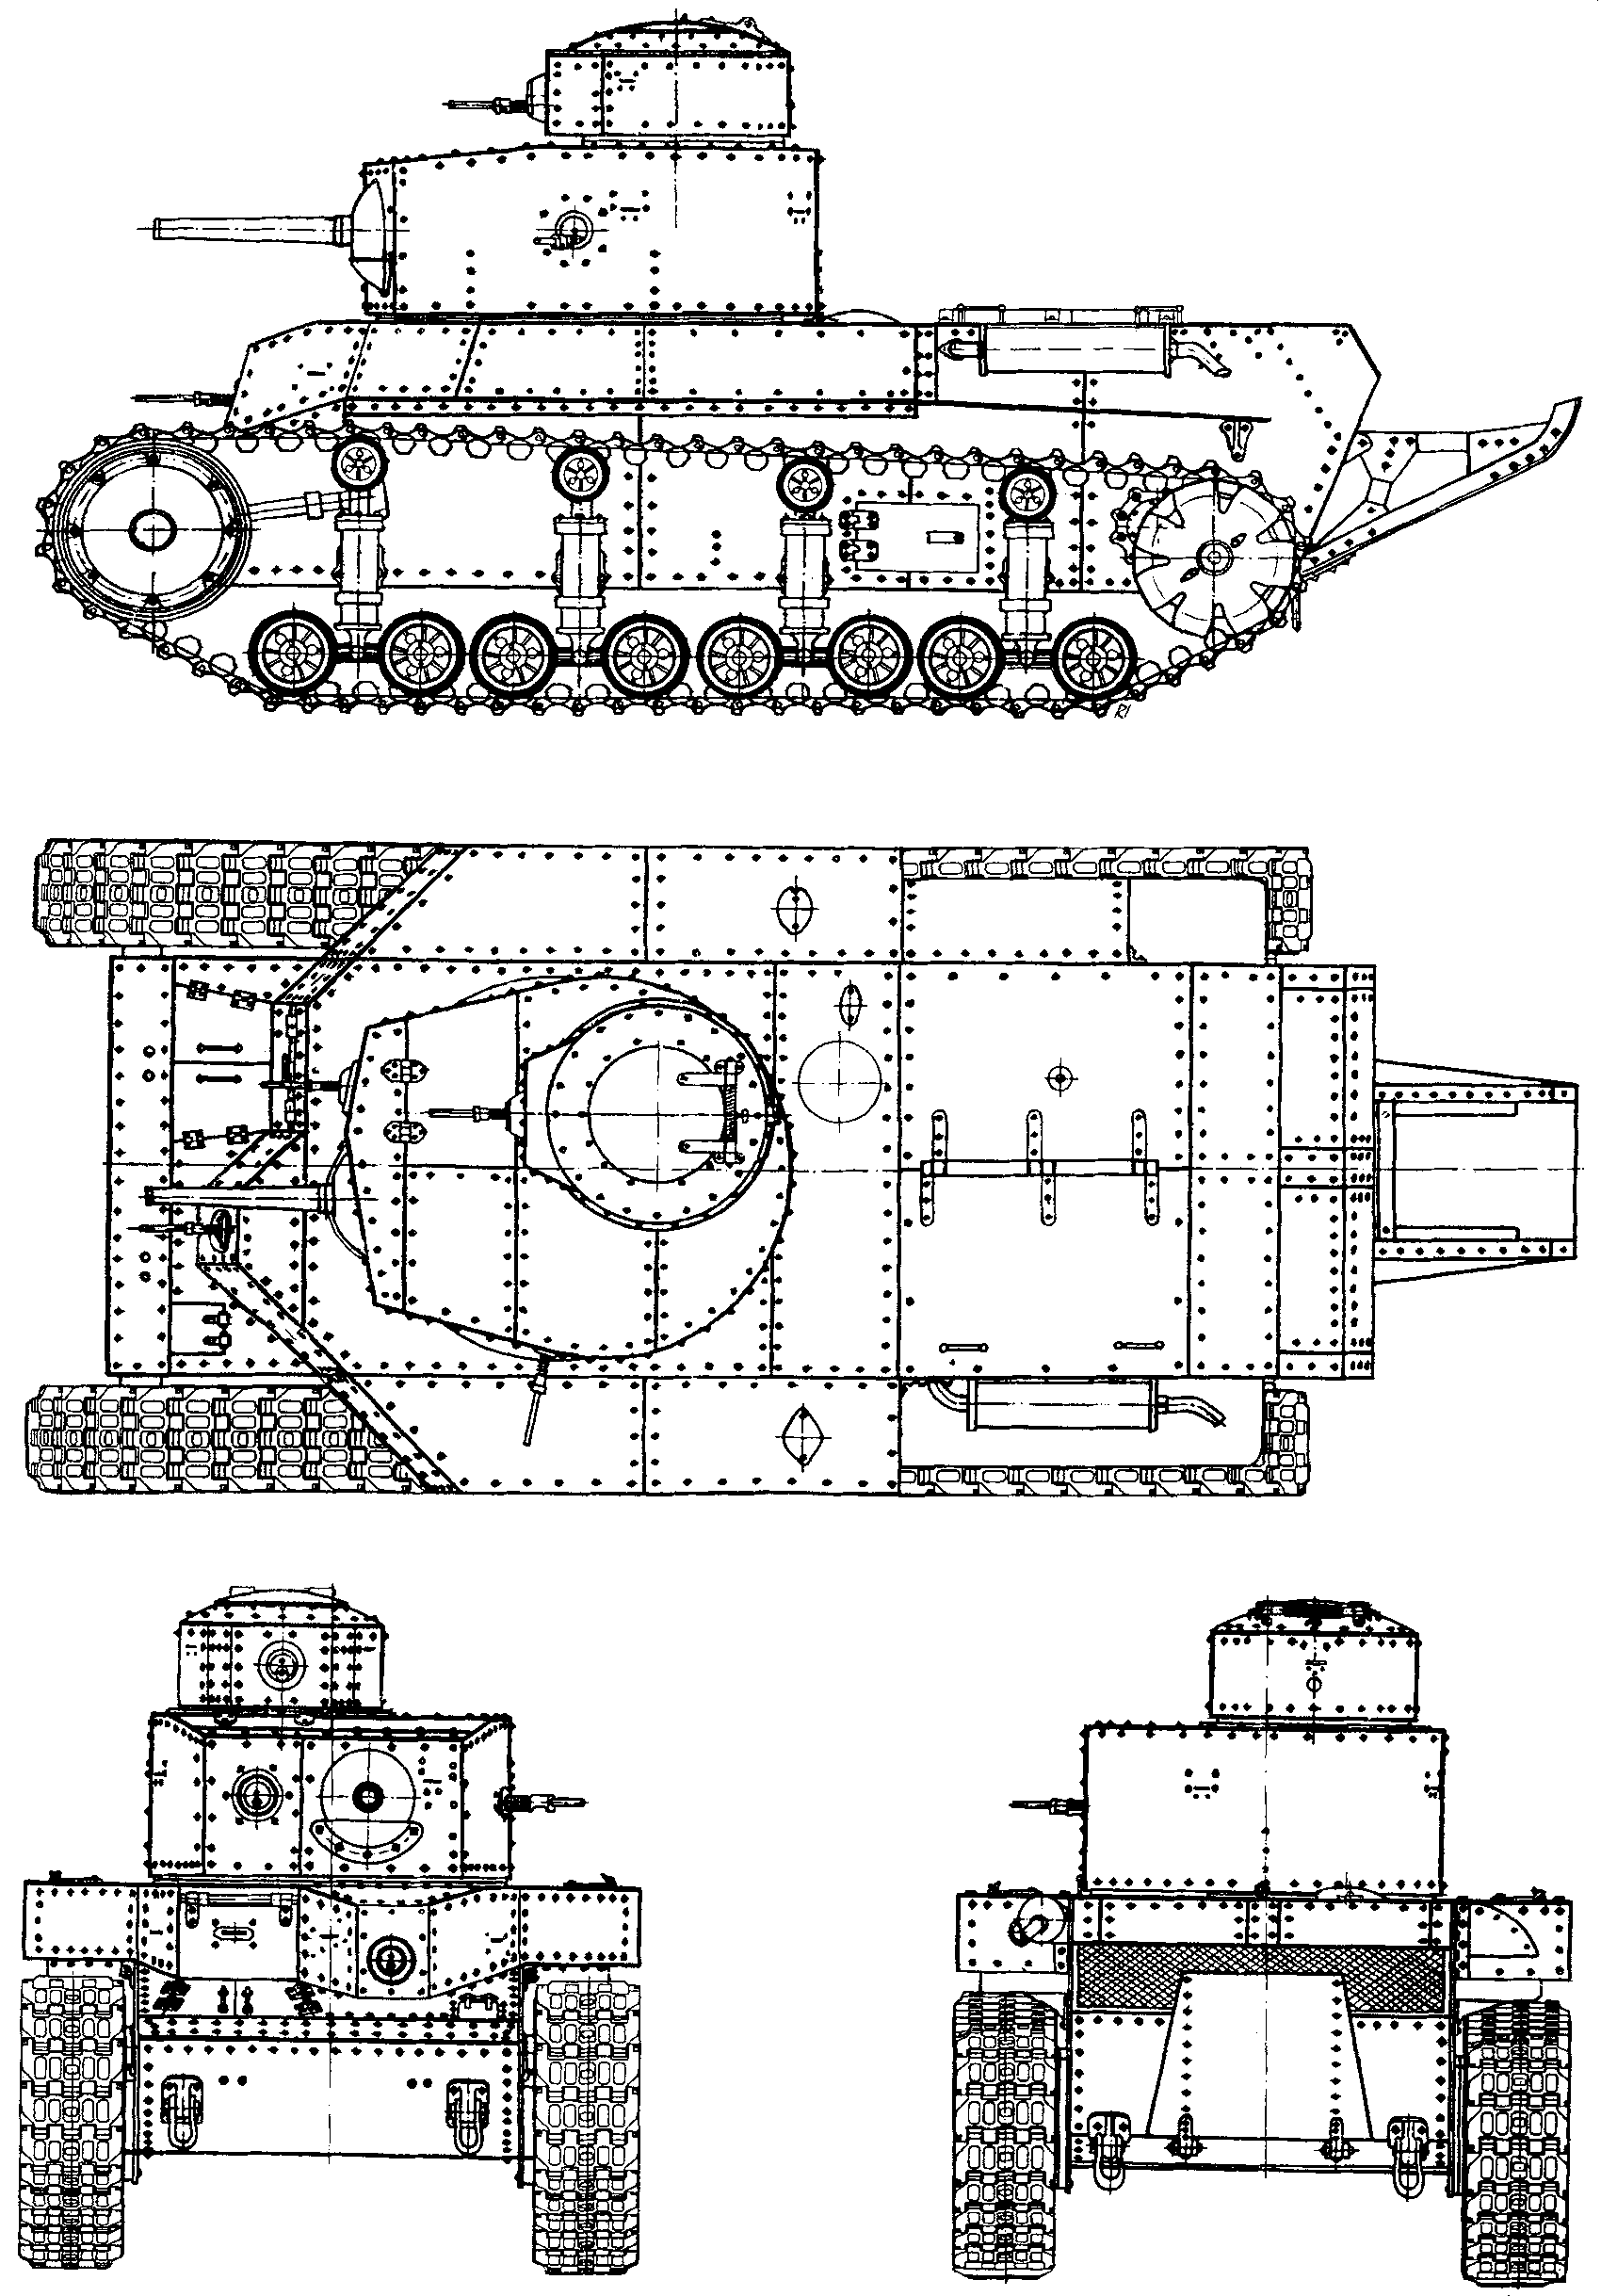 T-24 technical drawing. Notice how the turret is rounded at the back, as opposed to eight-sided